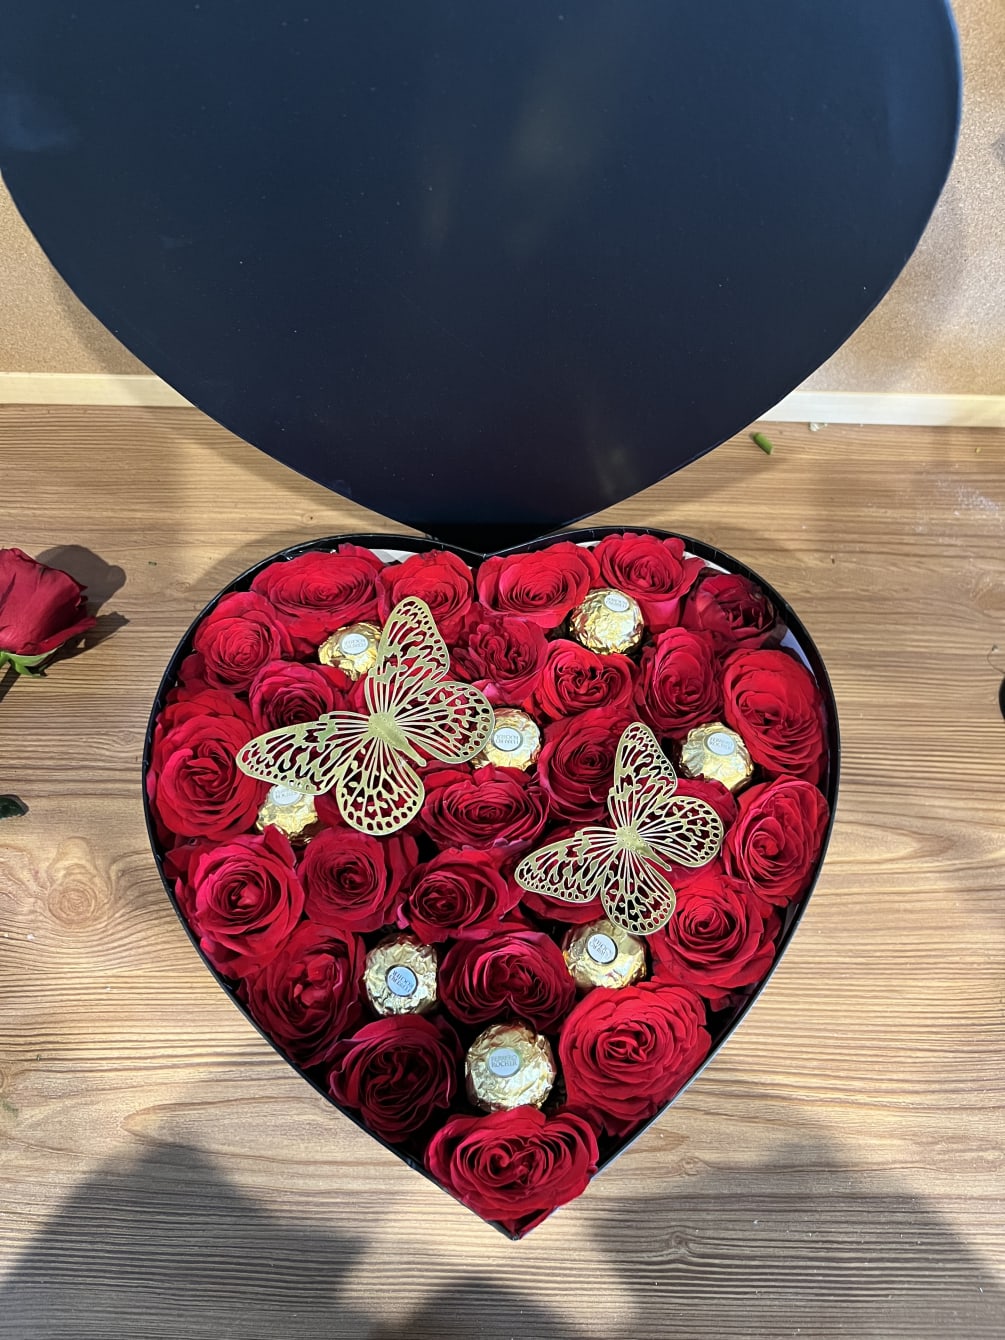 Medium heart shape black box with red roses and add on butterflies